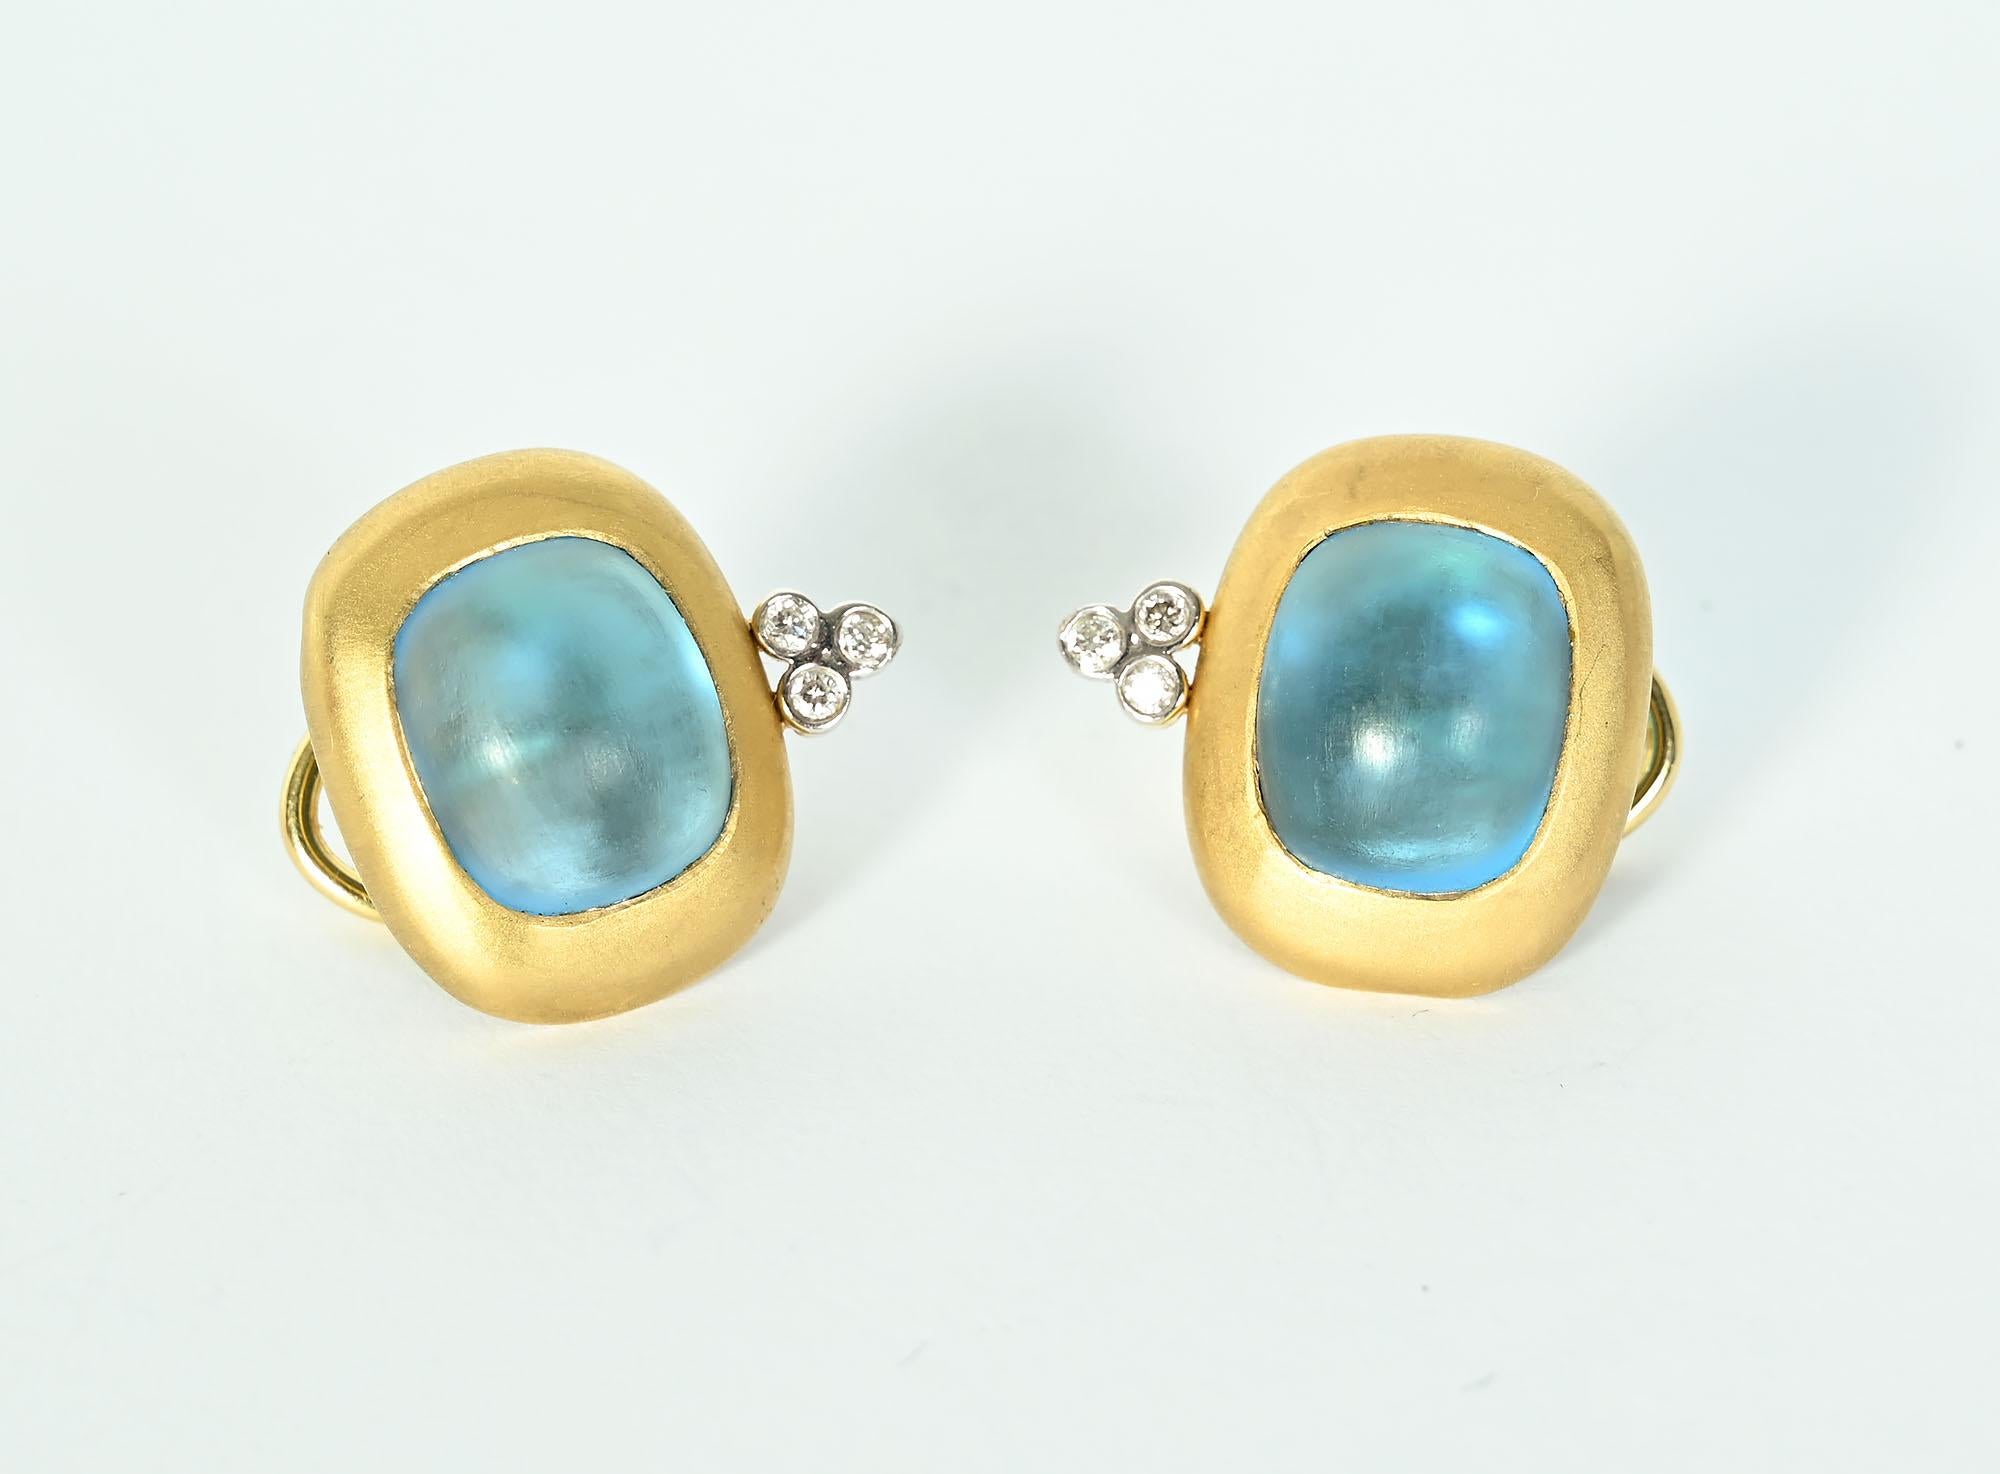 Colorful blue glass earrings with three diamonds below. Thet op part of the earring measures 3/4